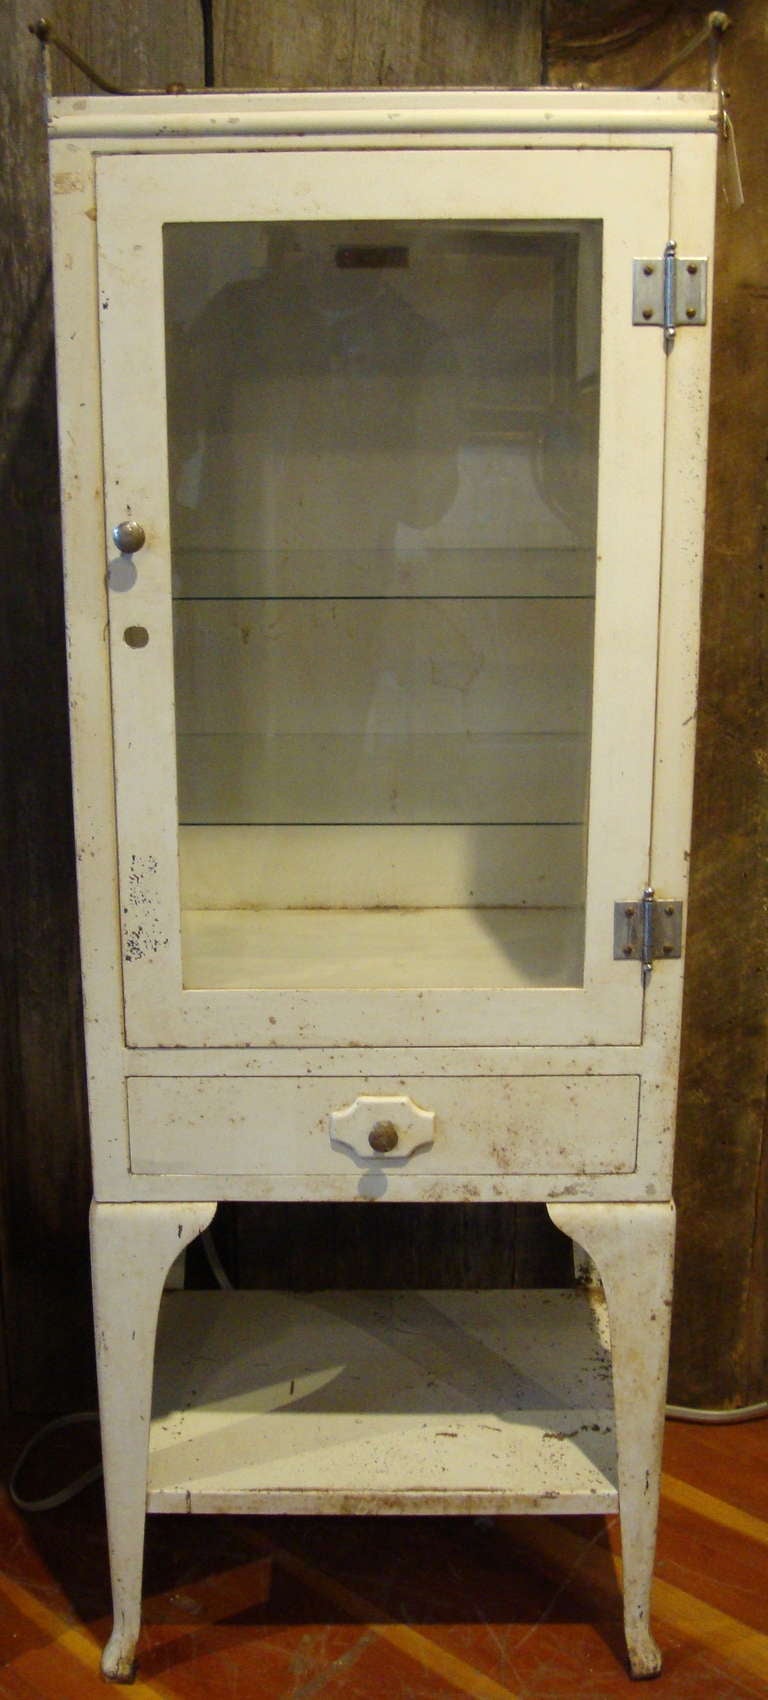 Steel medical cabinet in original paint, untouched condition with top galley and bottom drawer.